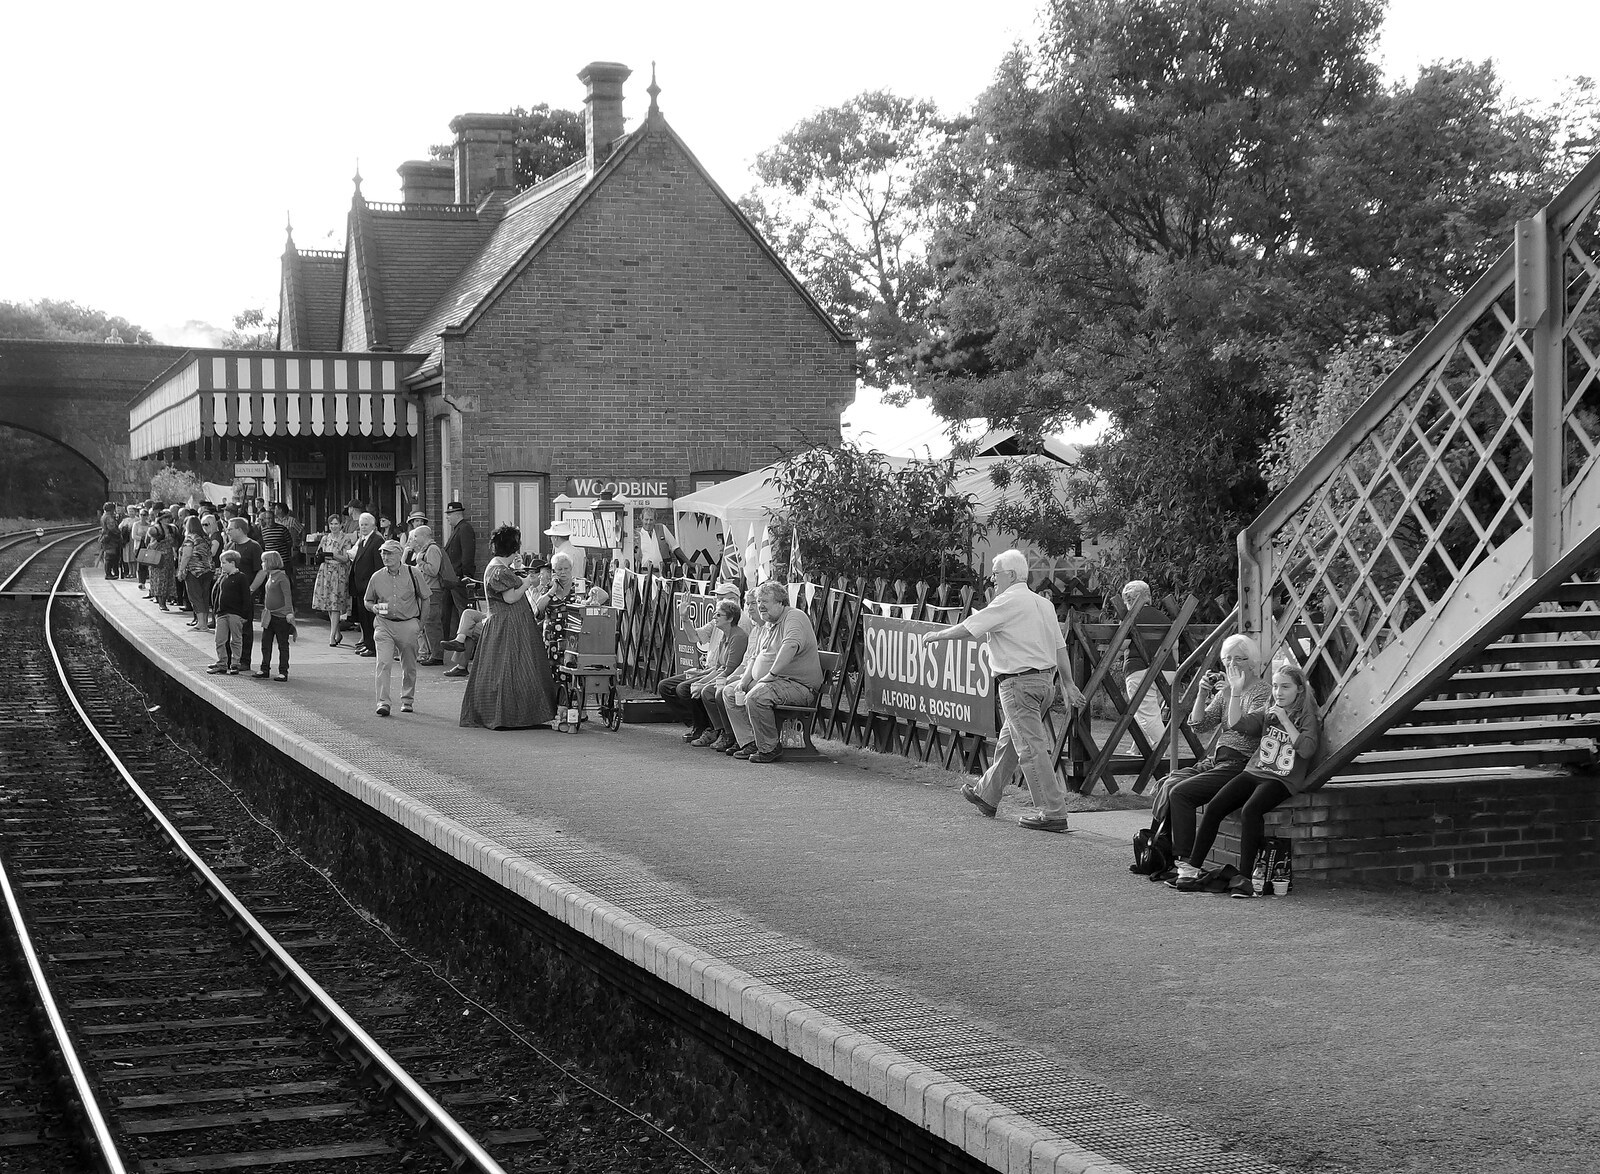 Weyborne station from Paul Bear's Adventures at a 1940s Steam Weekend, Holt, Norfolk - 22nd September 2013